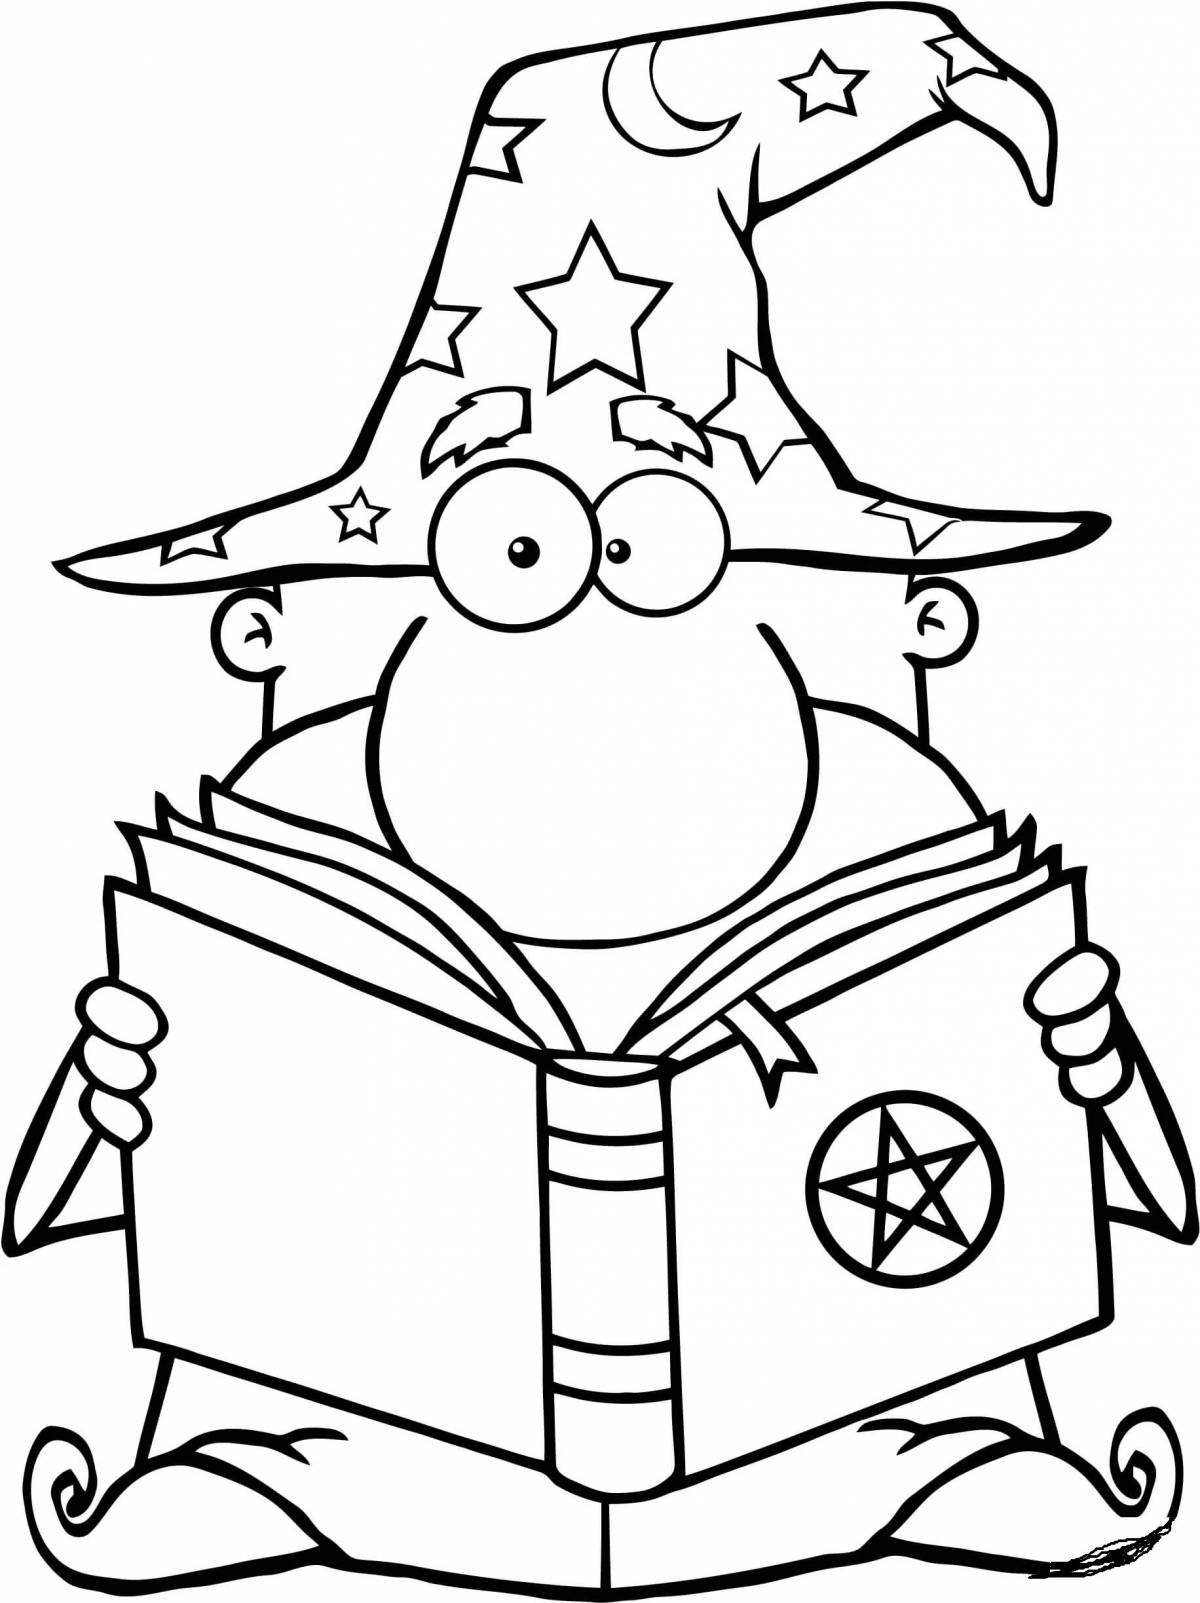 Coloring page mysterious wizard